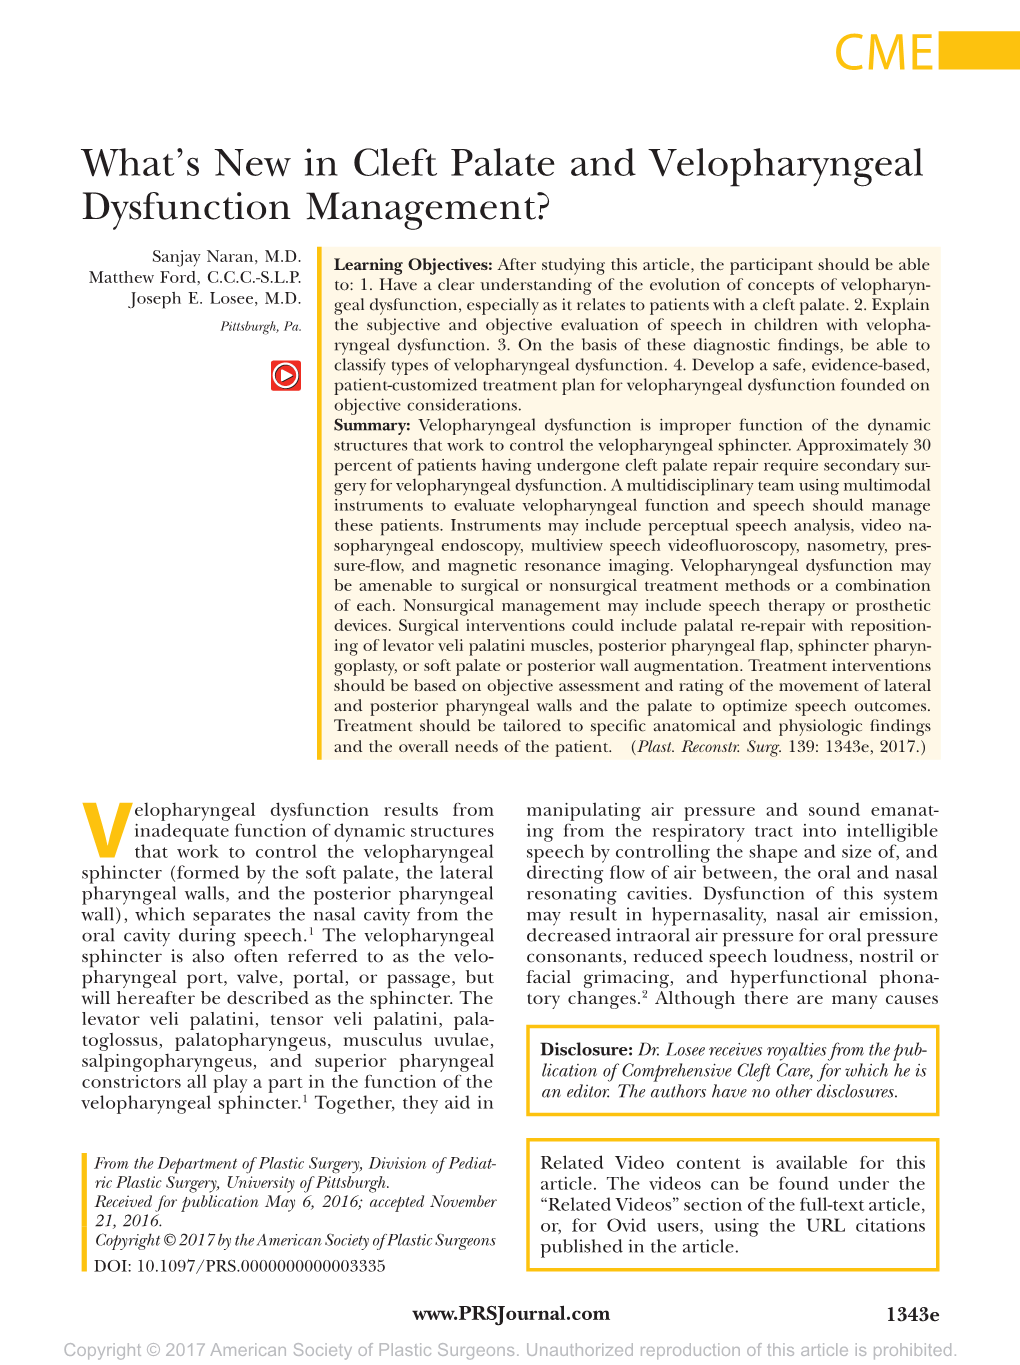 What's New in Cleft Palate and Velopharyngeal Dysfunction Management?